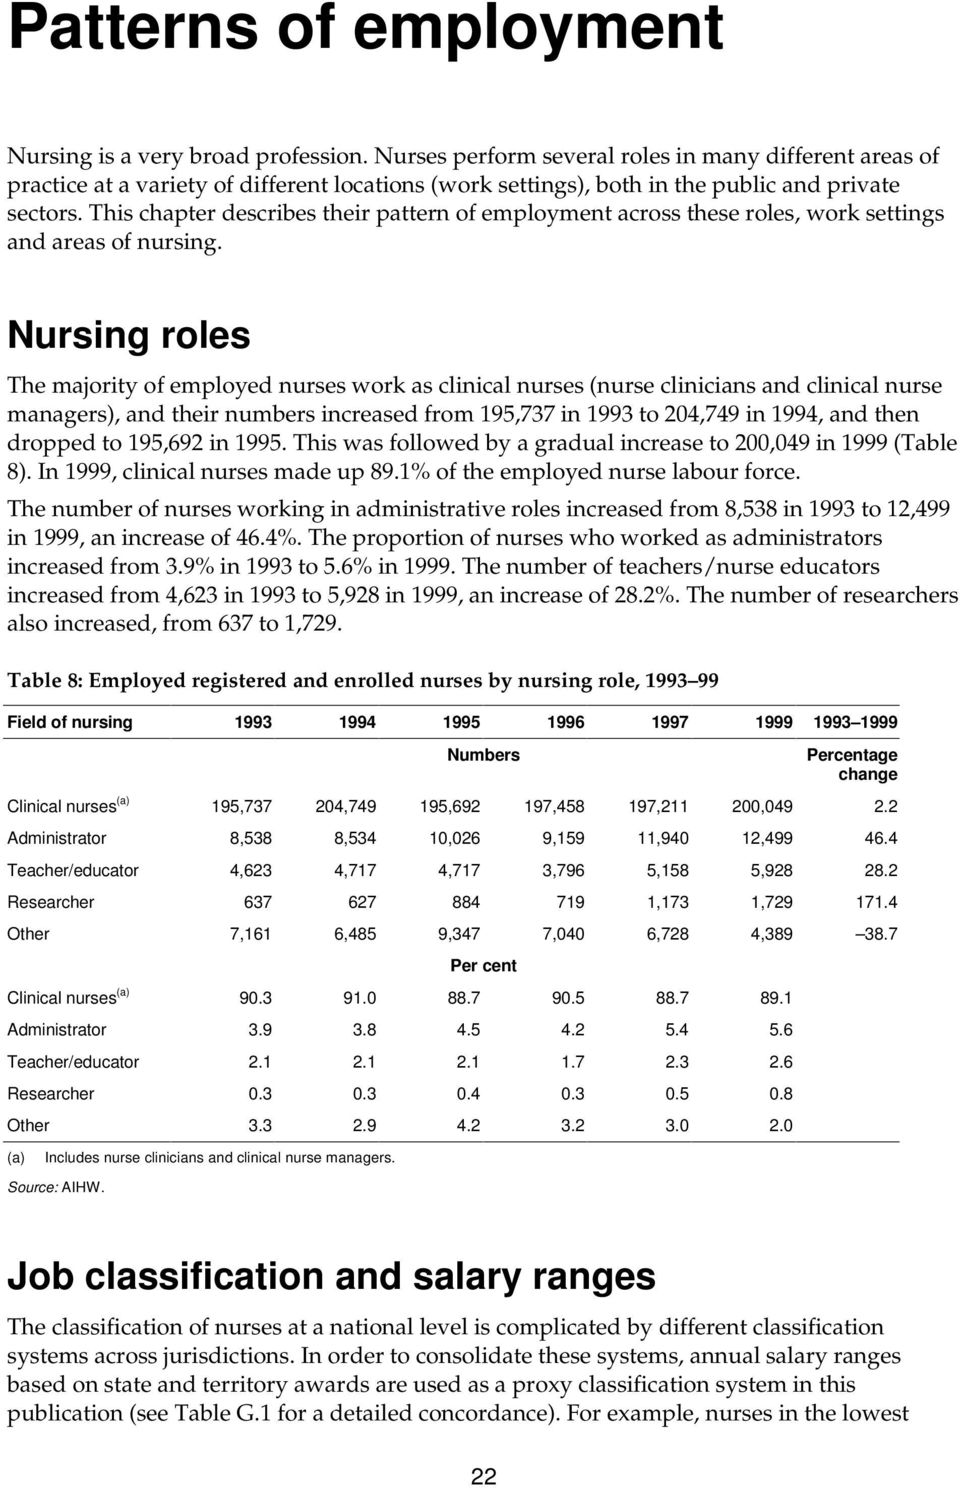 This chapter describes their pattern of employment across these roles, work settings and areas of nursing.